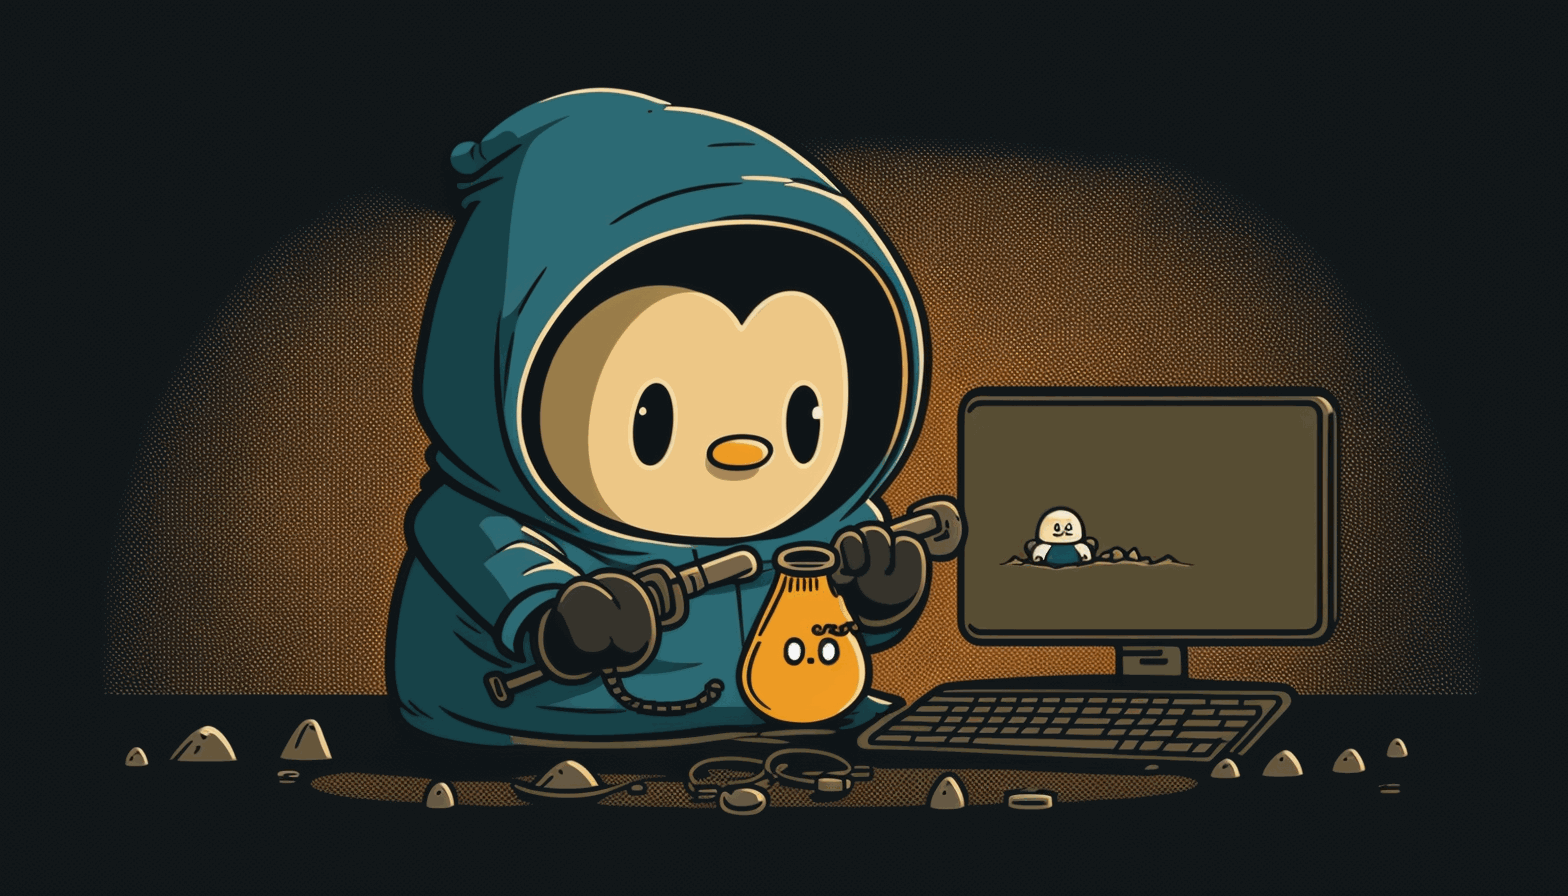 A cartoon illustration of a person wearing a hoodie, sitting in front of a computer screen with the Linux command line interface visible, and holding a magnifying glass to represent the cybersecurity aspect.